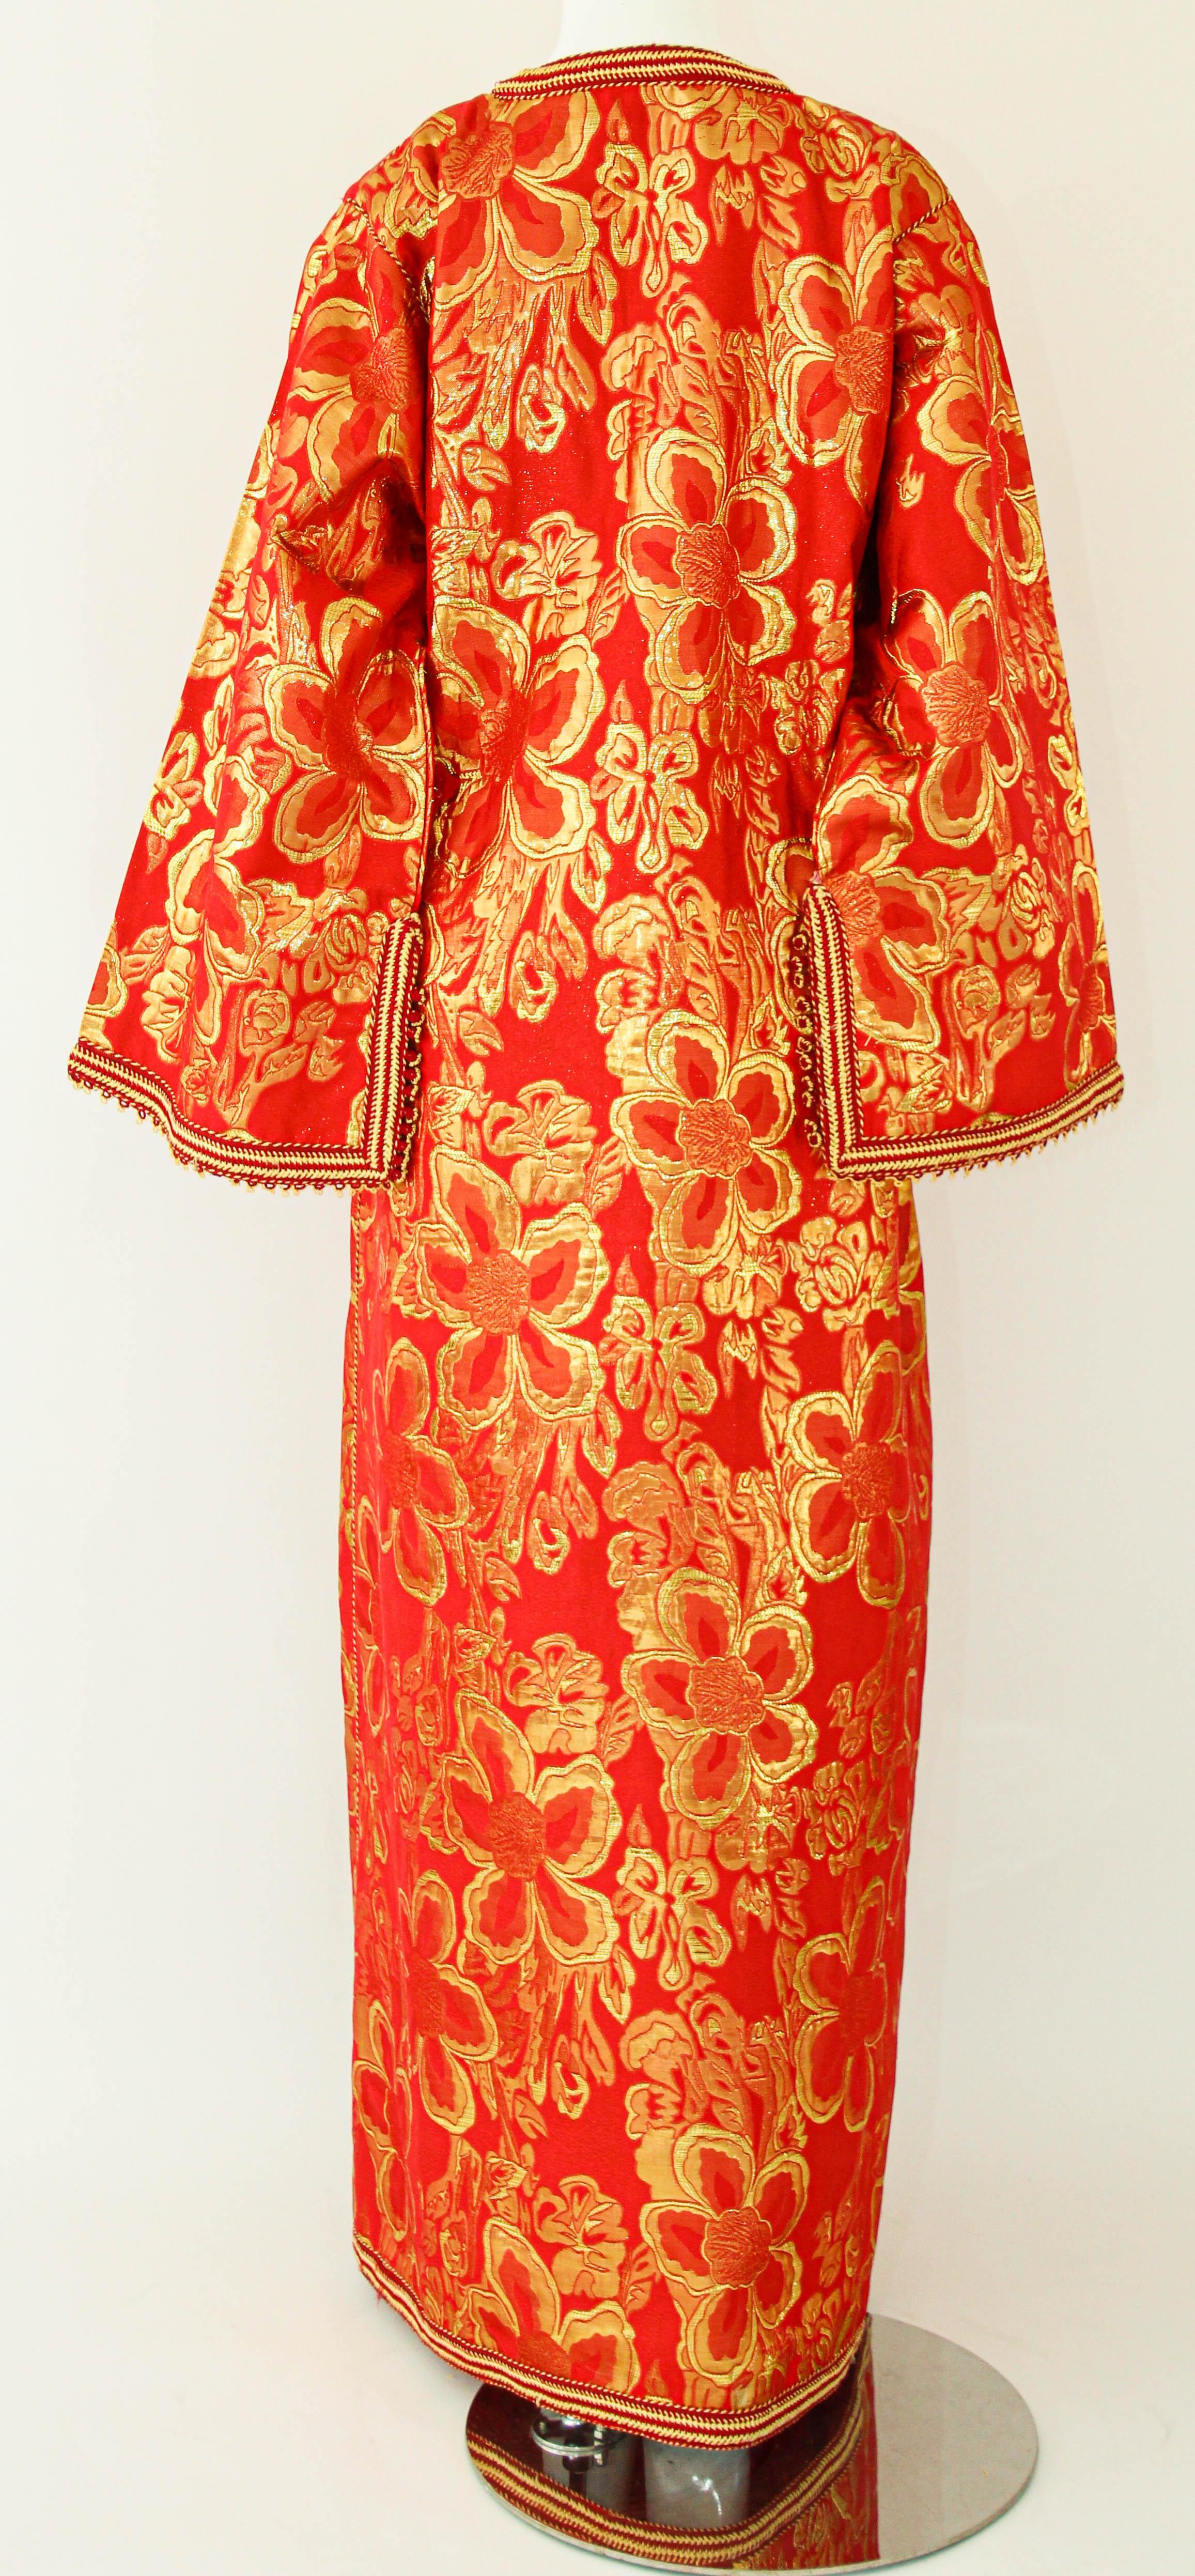 1970s Vintage Moroccan Kaftan Red and Gold Brocade Caftan Maxi Dress For Sale 13